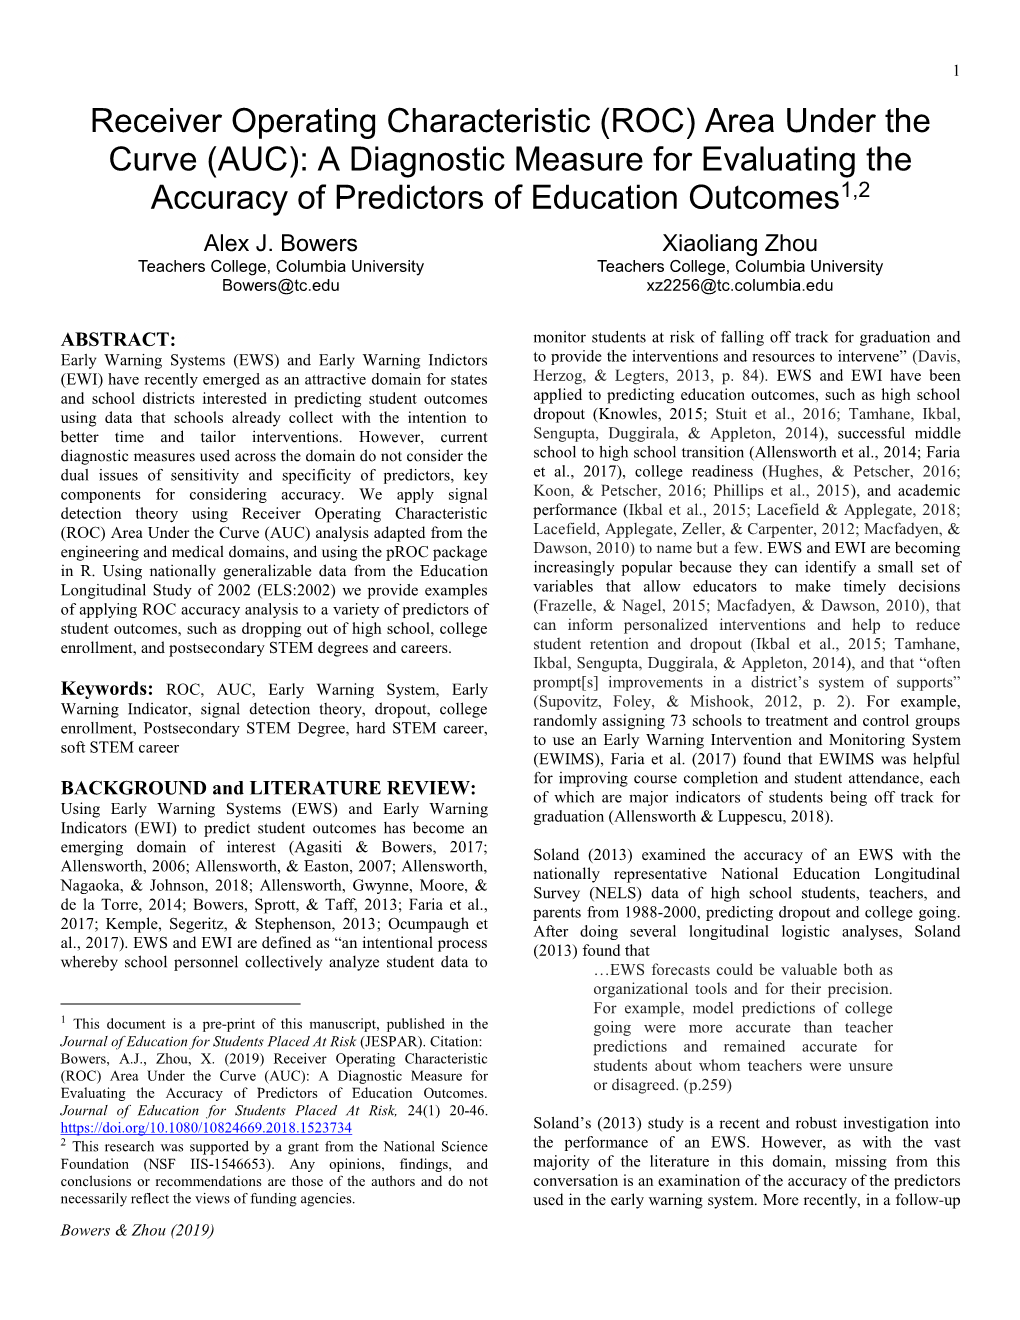 Receiver Operating Characteristic (ROC) Area Under the Curve (AUC): a Diagnostic Measure for Evaluating the Accuracy of Predictors of Education Outcomes1,2 Alex J